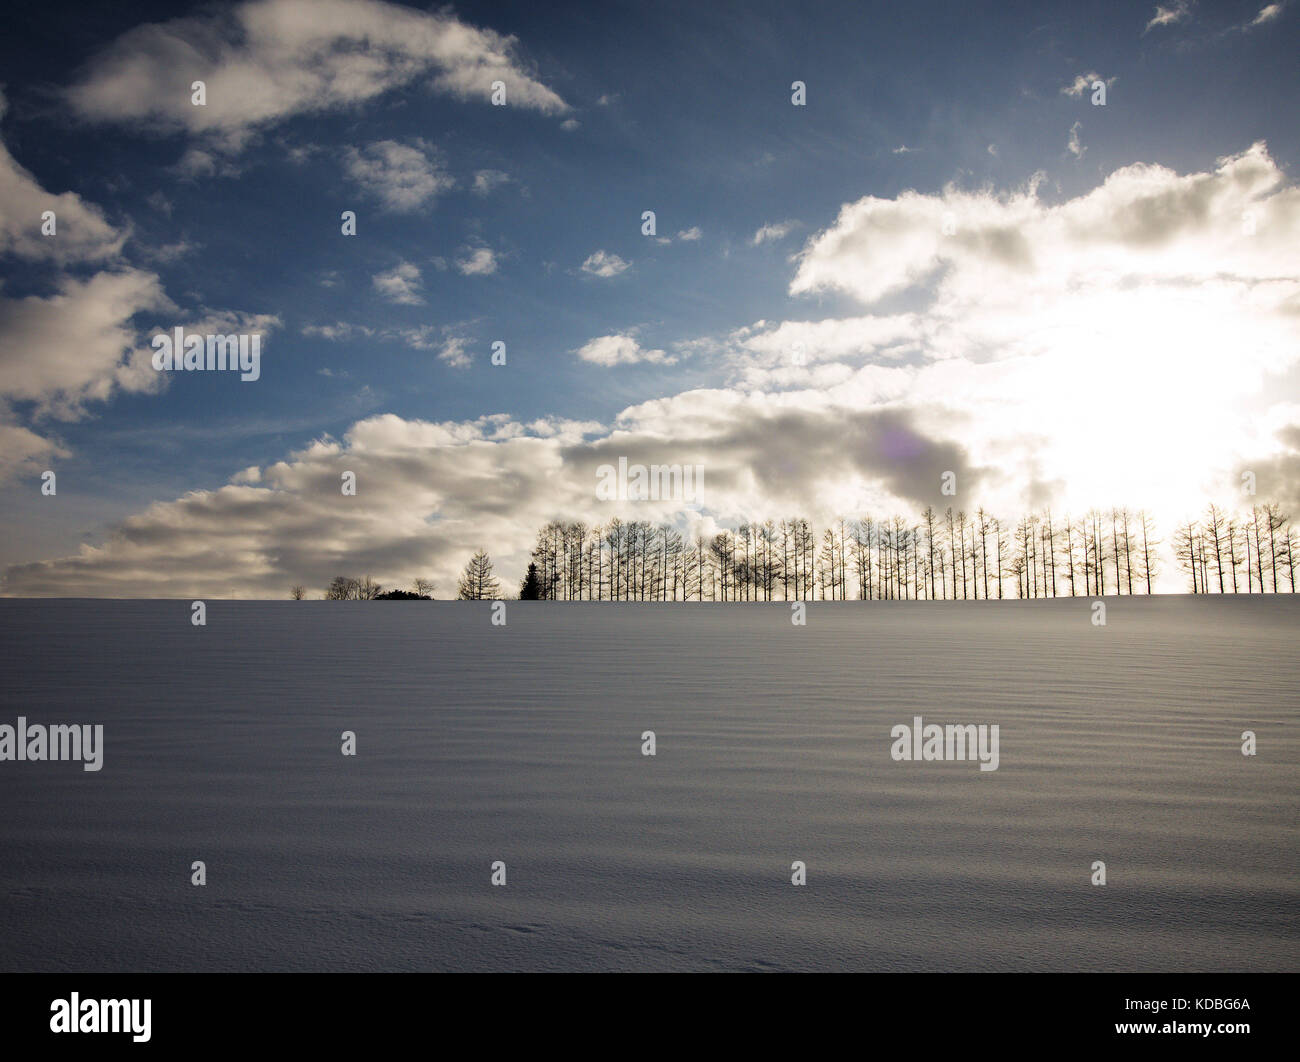 Row of trees at Mild Seven Hills, Biei, Hokkaido, Japan, in winter with snowfield Stock Photo